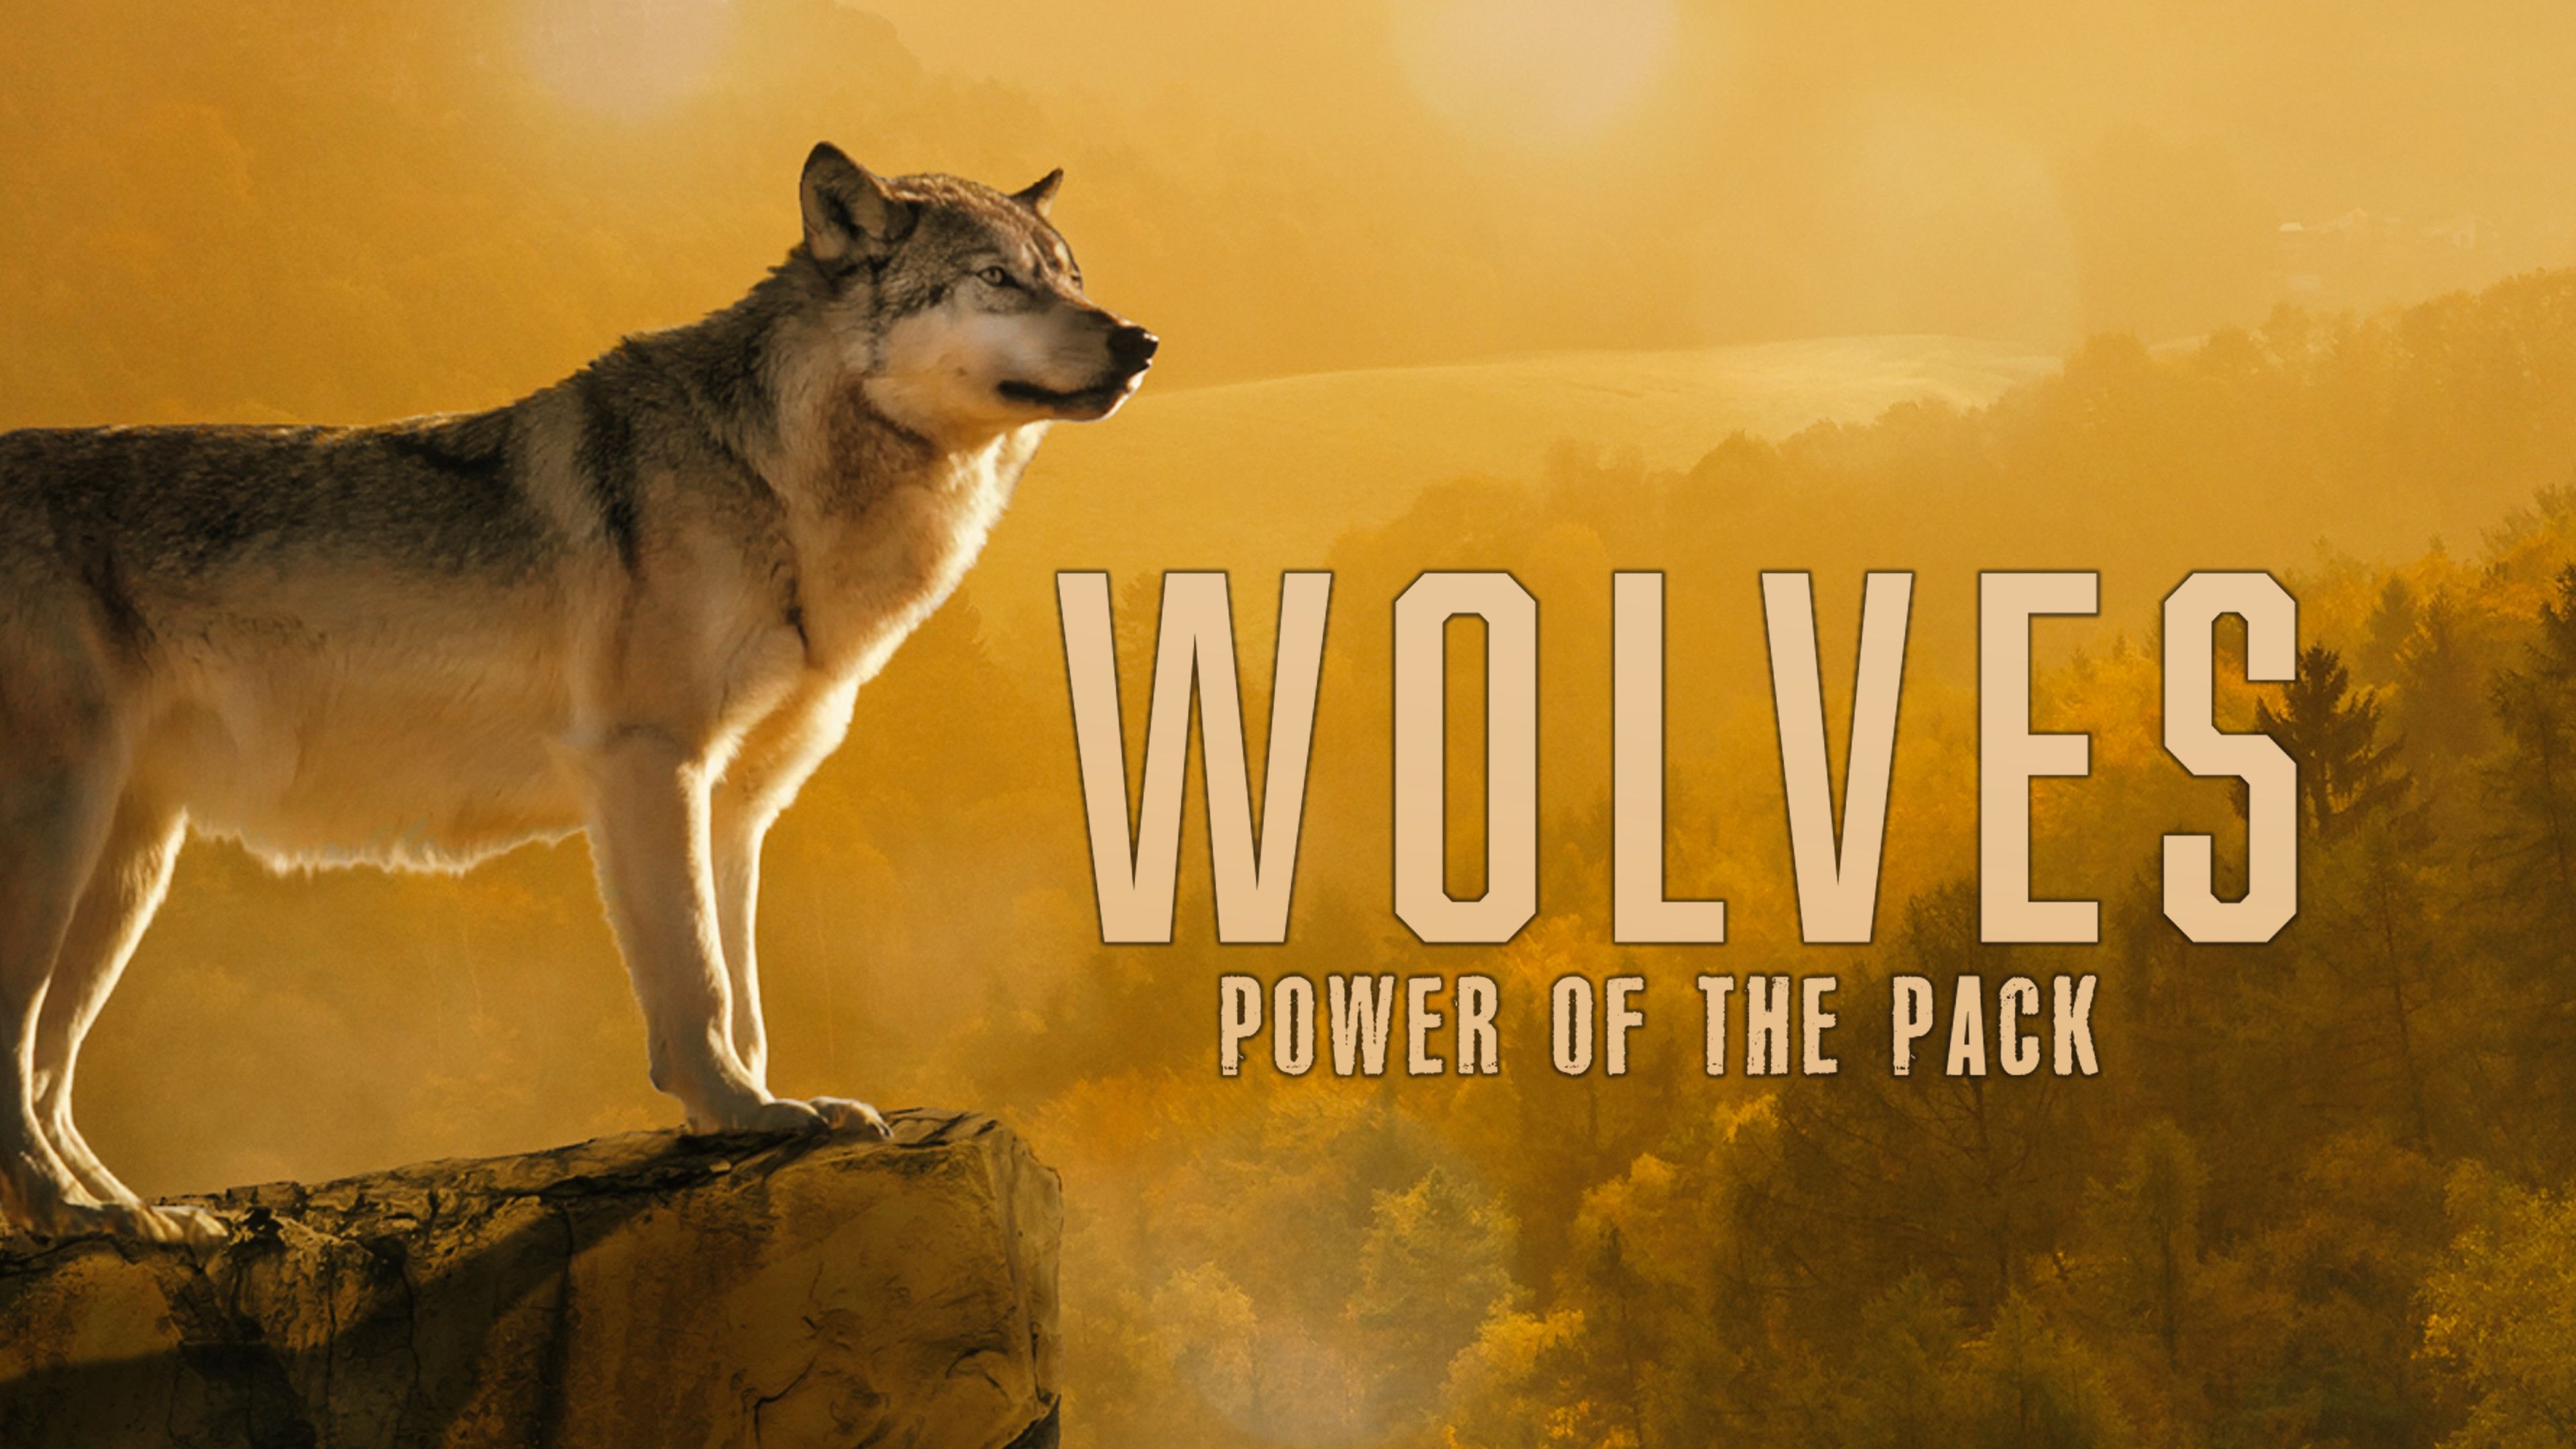 Wolves - Power of the Pack